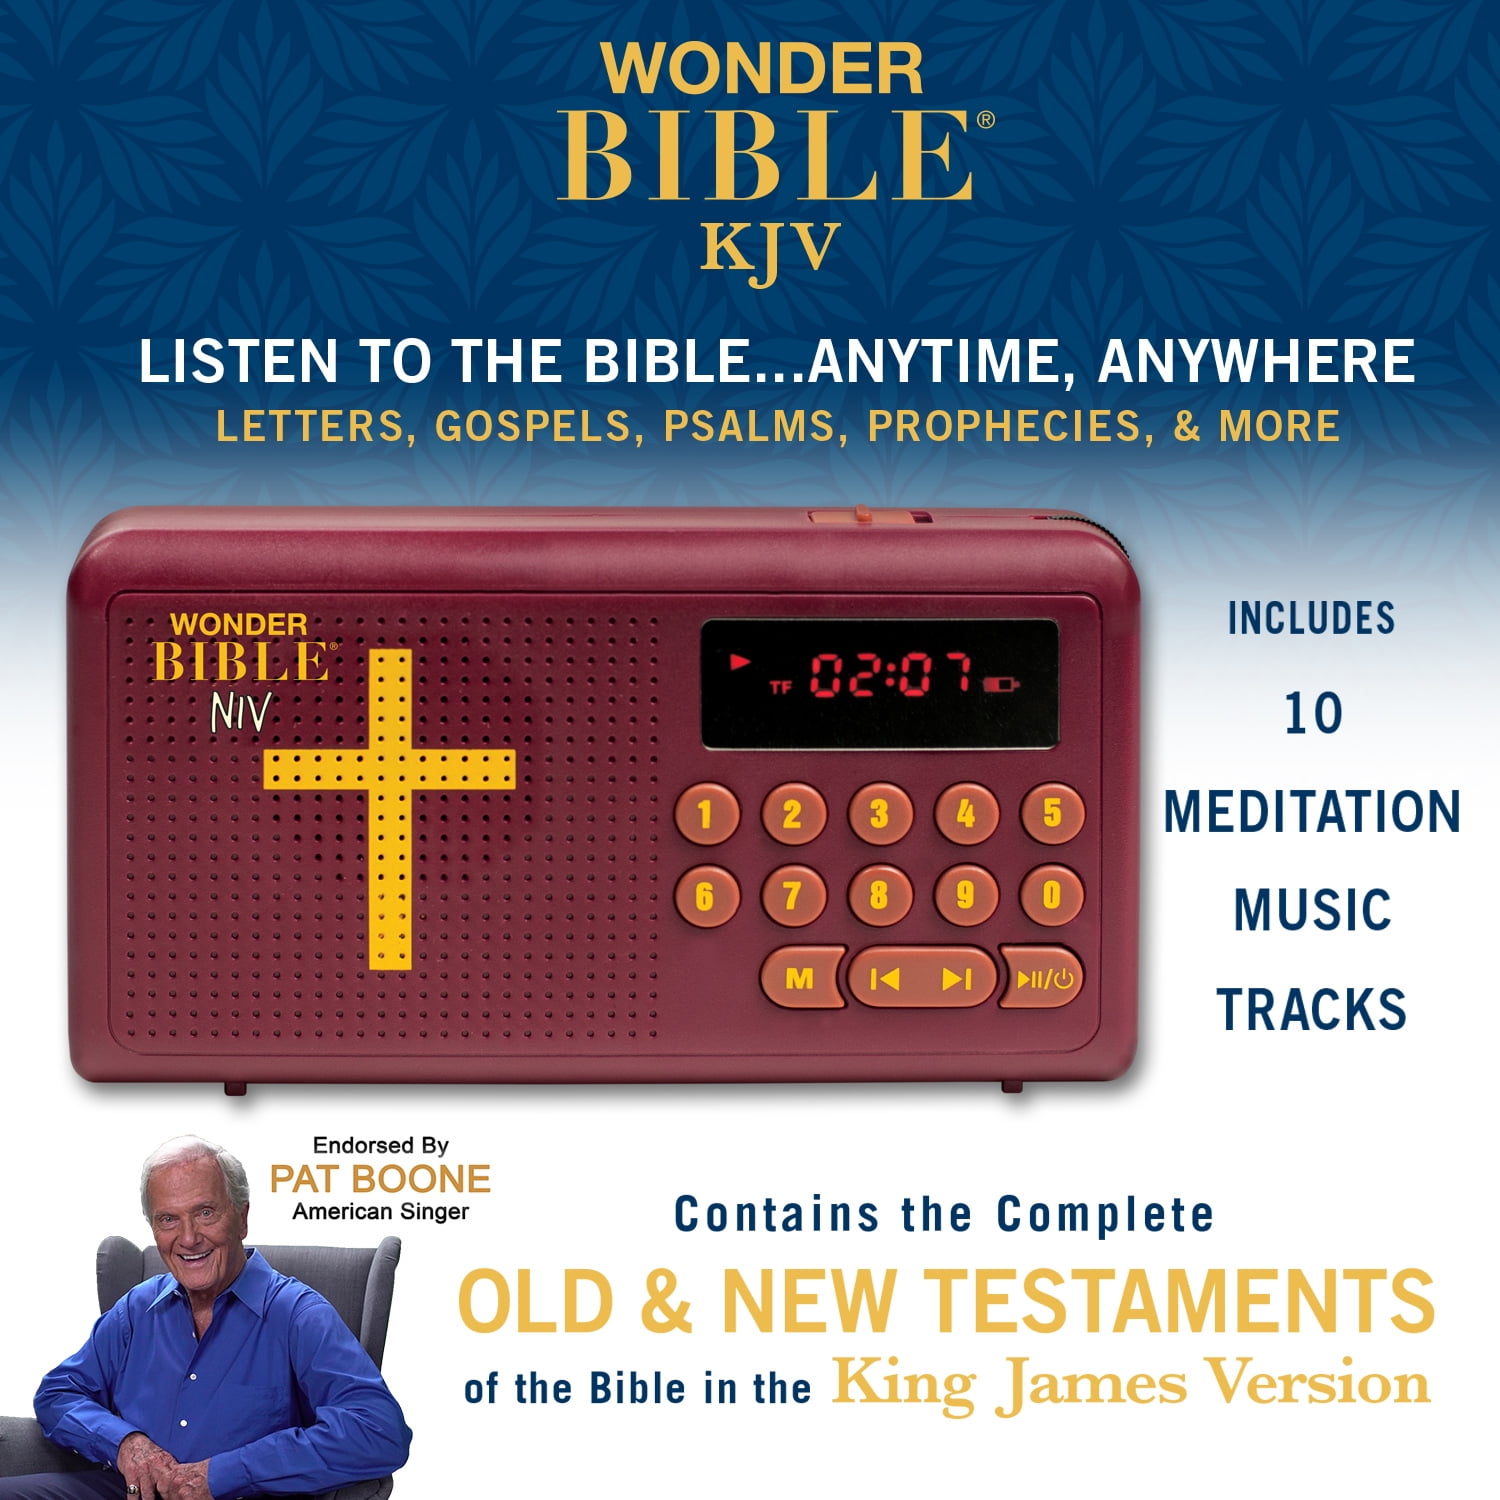 New & Old Testament Endorsed Kids Audio Bible Player,USB Rechargeable,Gift for Kids Friends and Family Bible Player Talking Audio Bible Reader English Standard Version KJV King James Version 